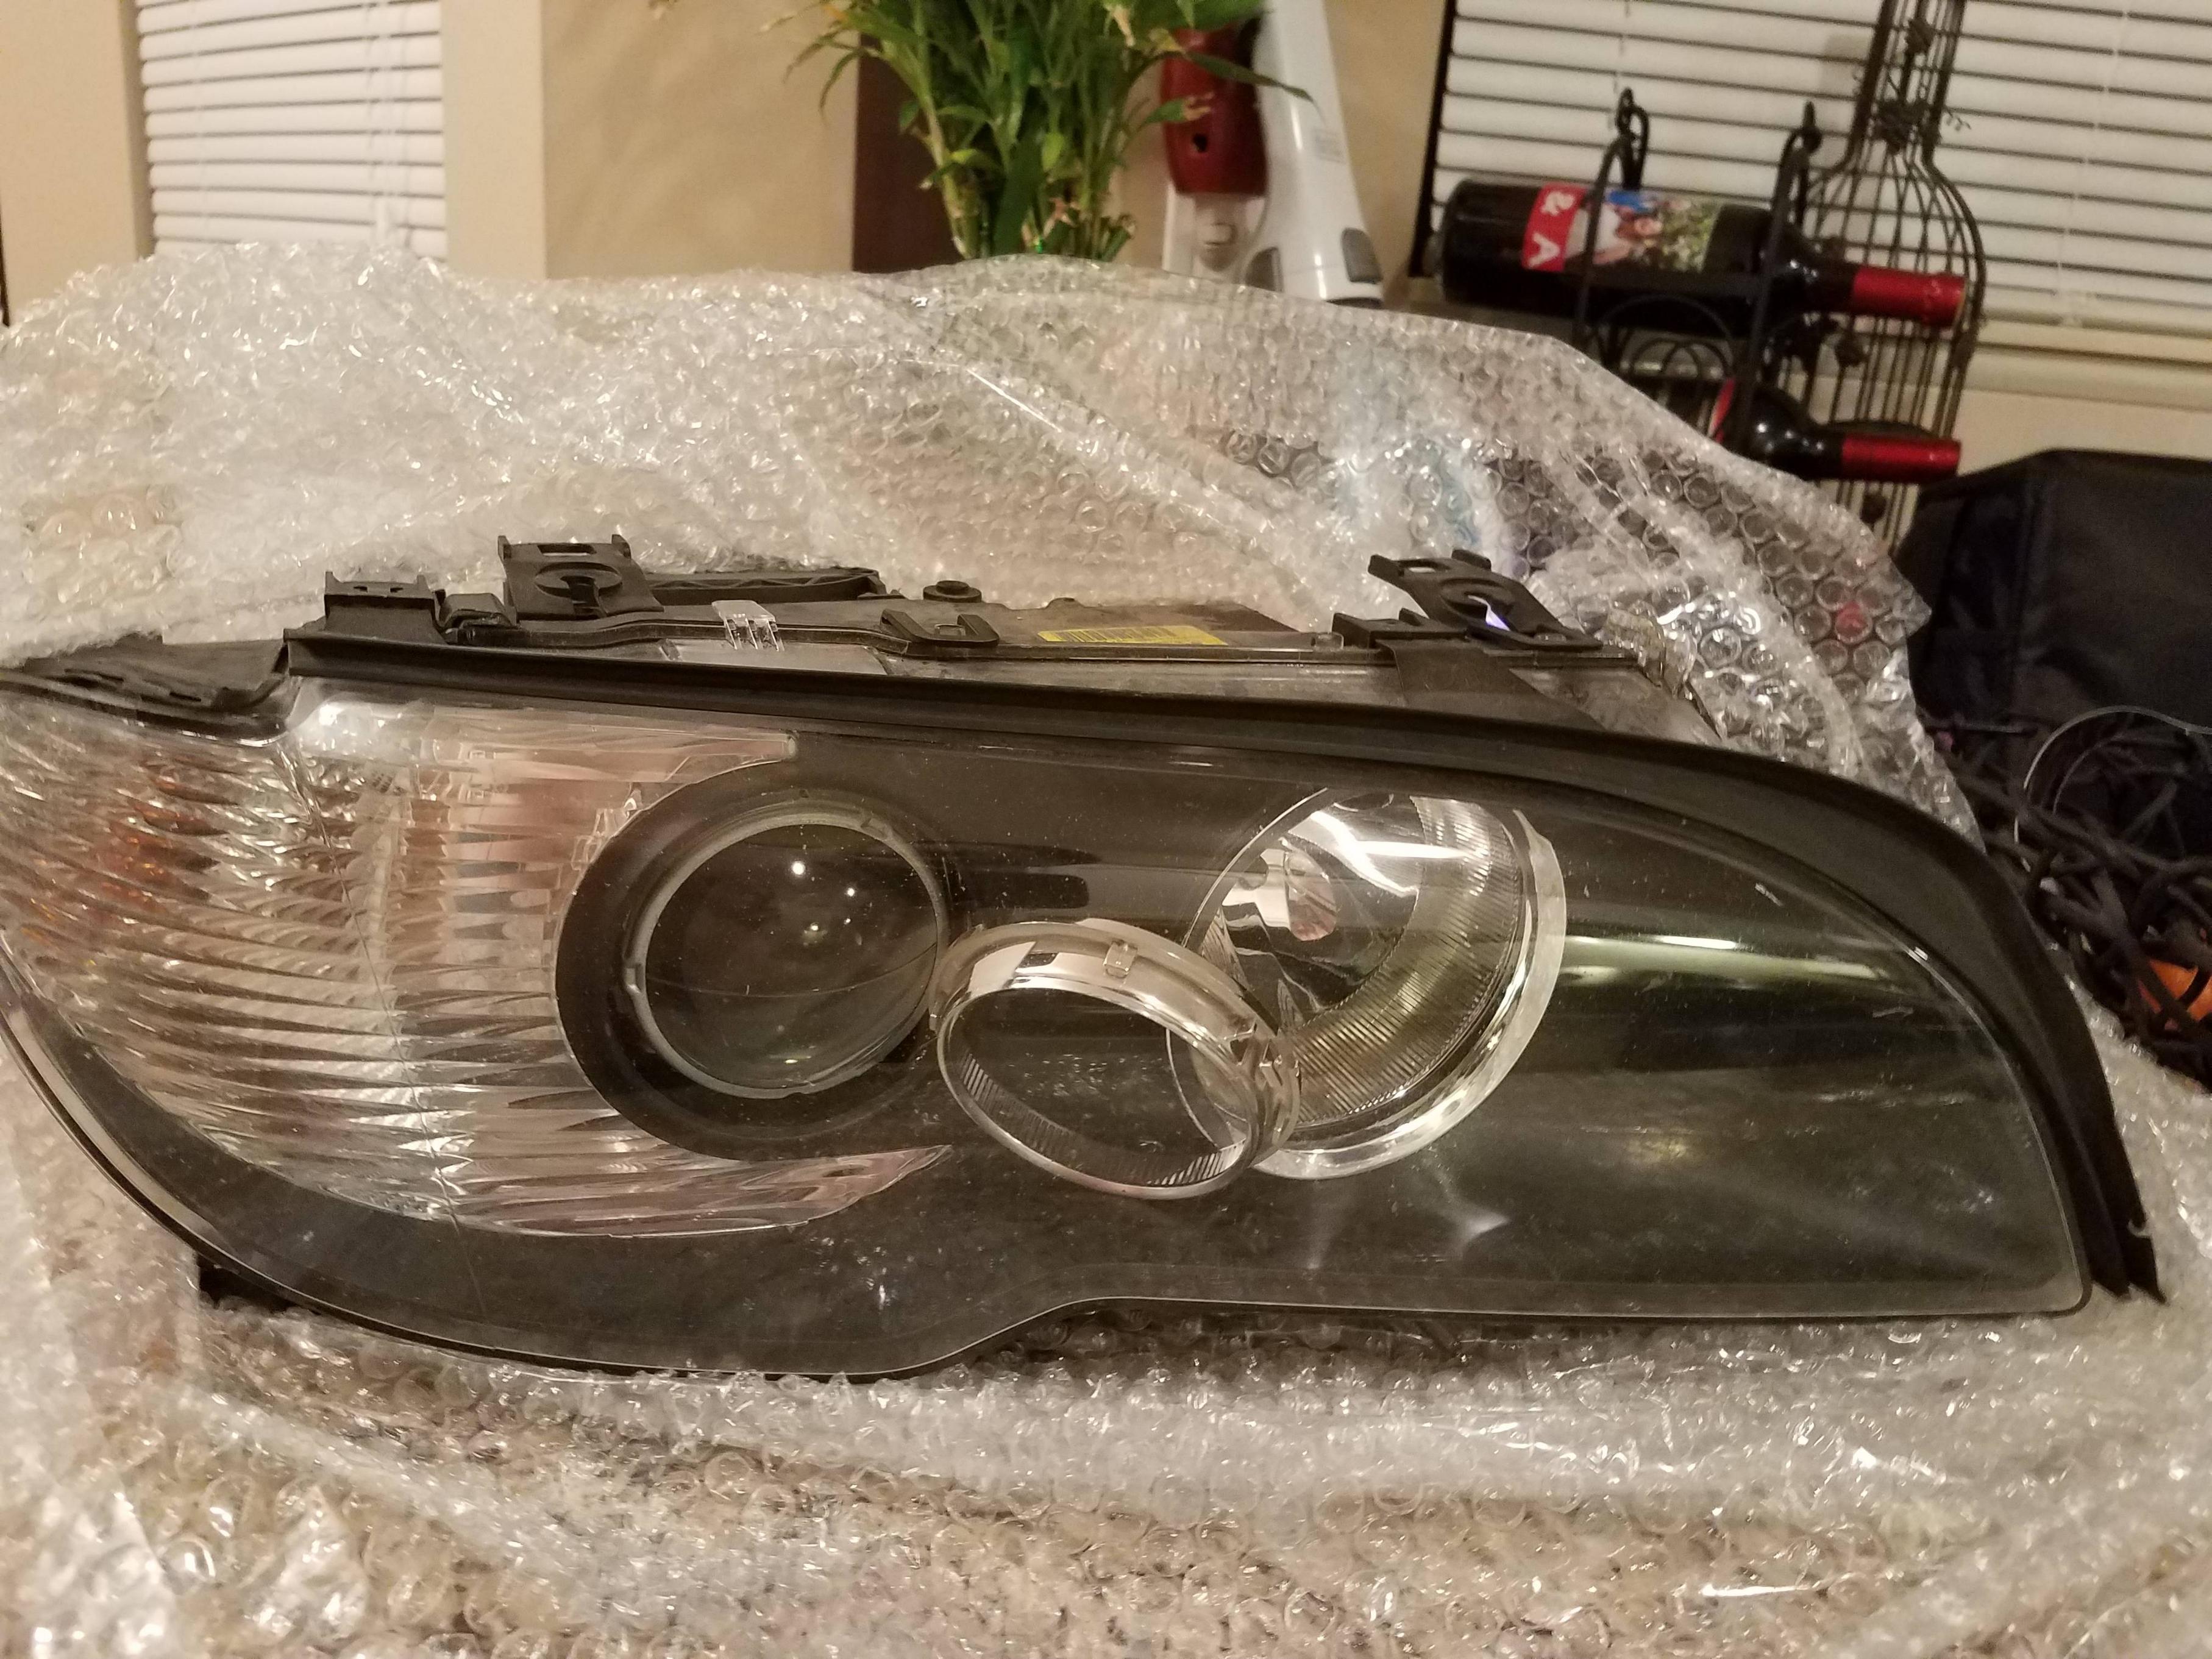 Opening e46 facelift coupe headlight question...